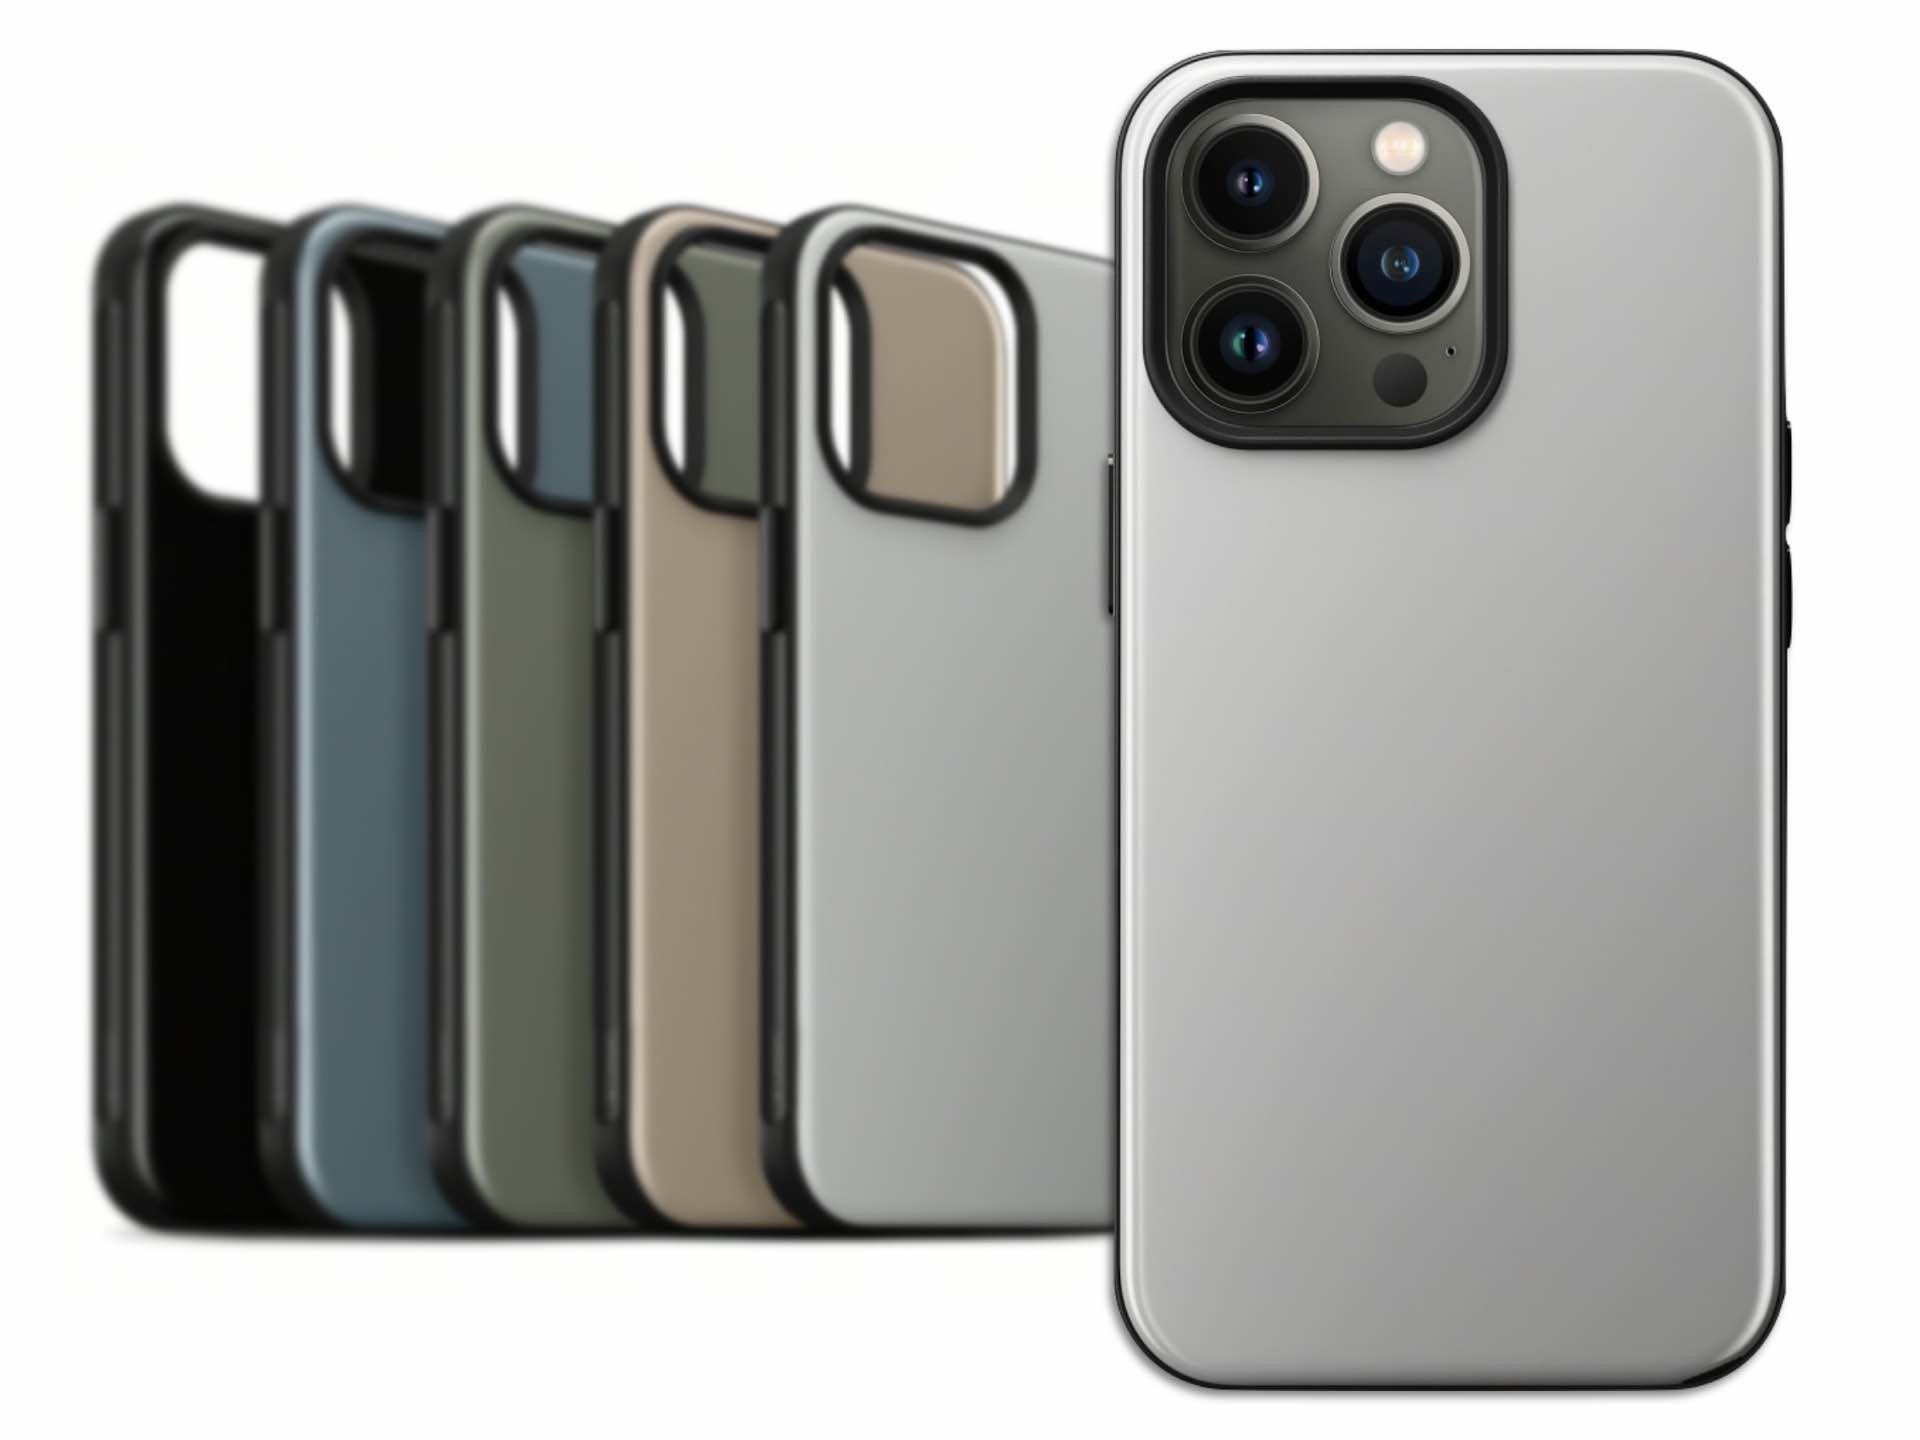 Nomad Sport Case for iPhone 13. ($40)